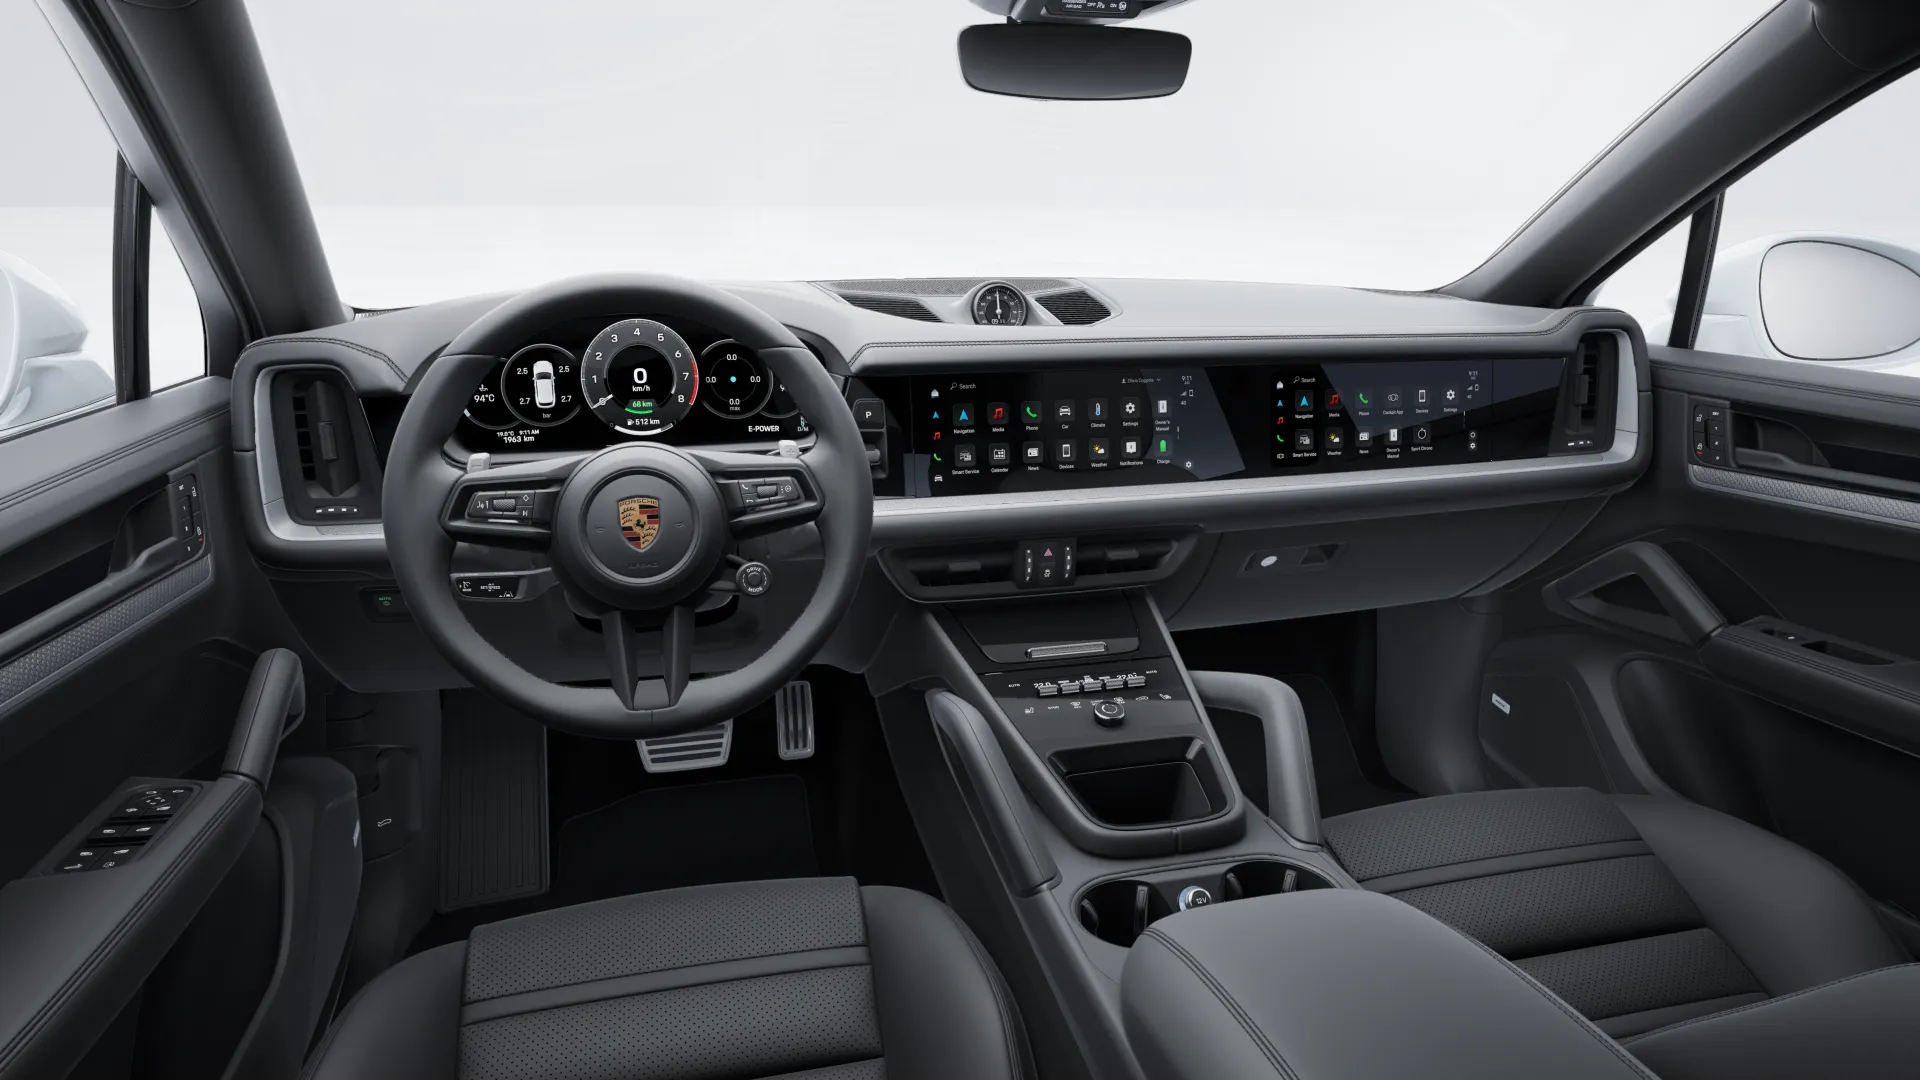 Interior view of Cayenne S E-Hybrid Coupe